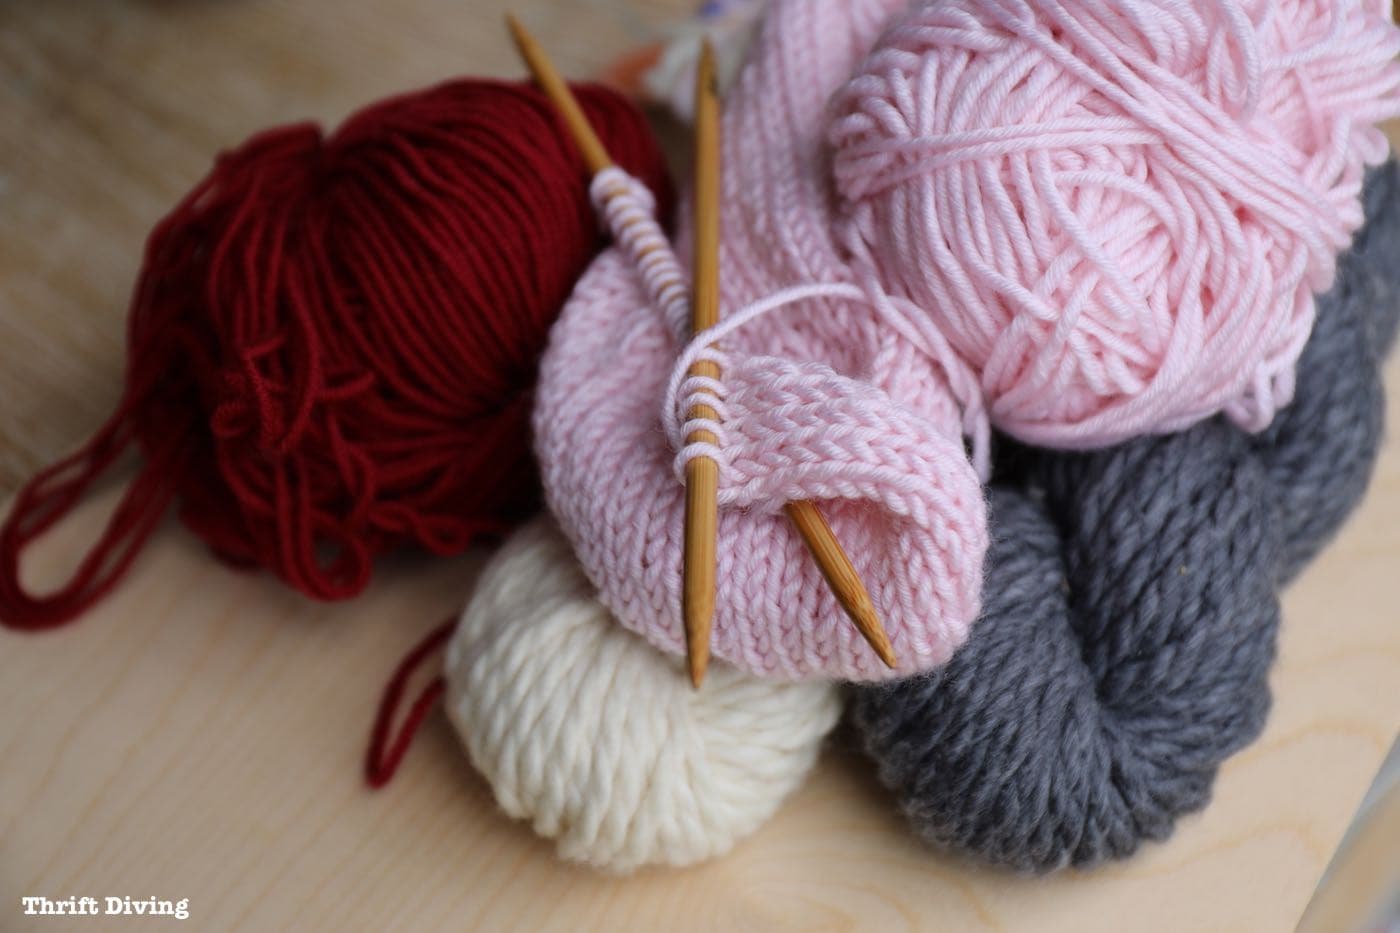 Spend the day knitting for National Day of Unplugging. - Thrift Diving